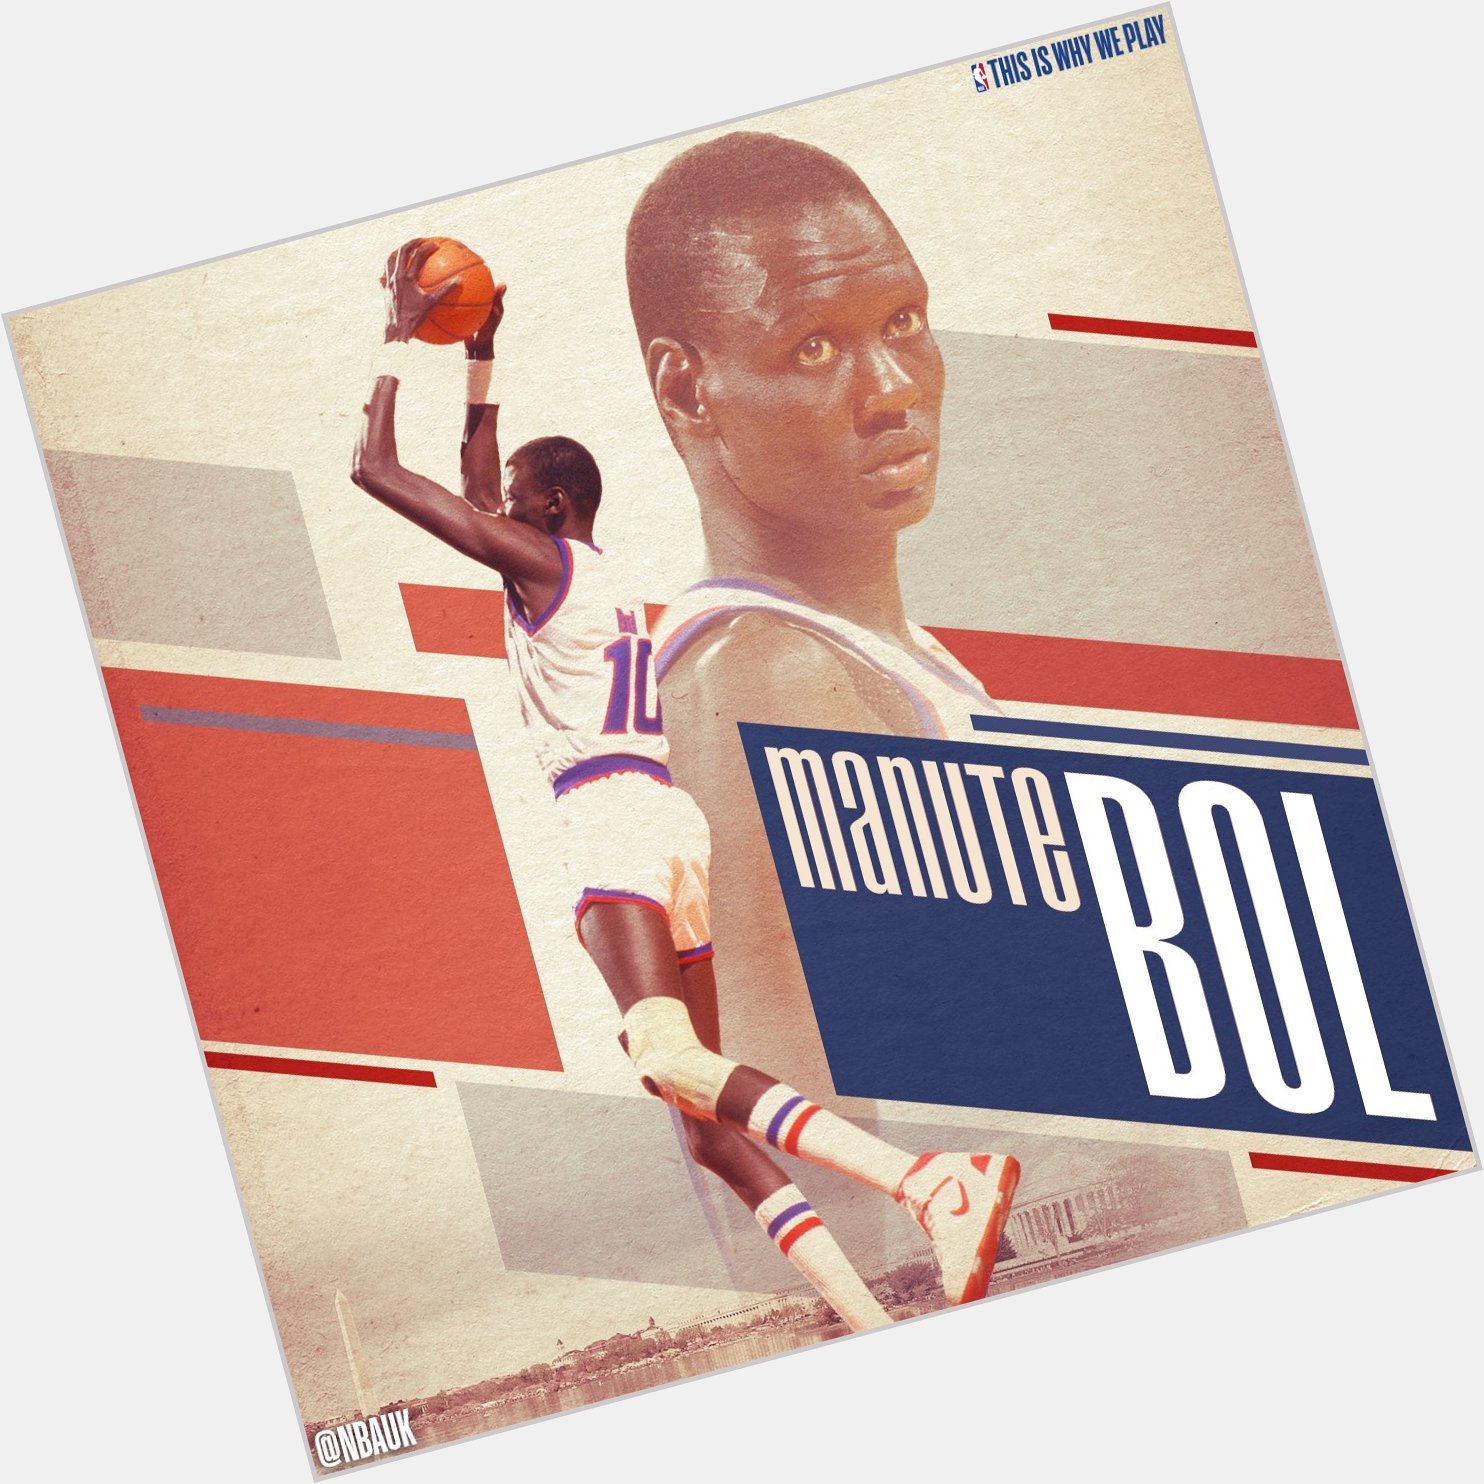 Wishing a very Happy Birthday to one of the tallest players in NBA history, the 7\7\" Manute Bol 